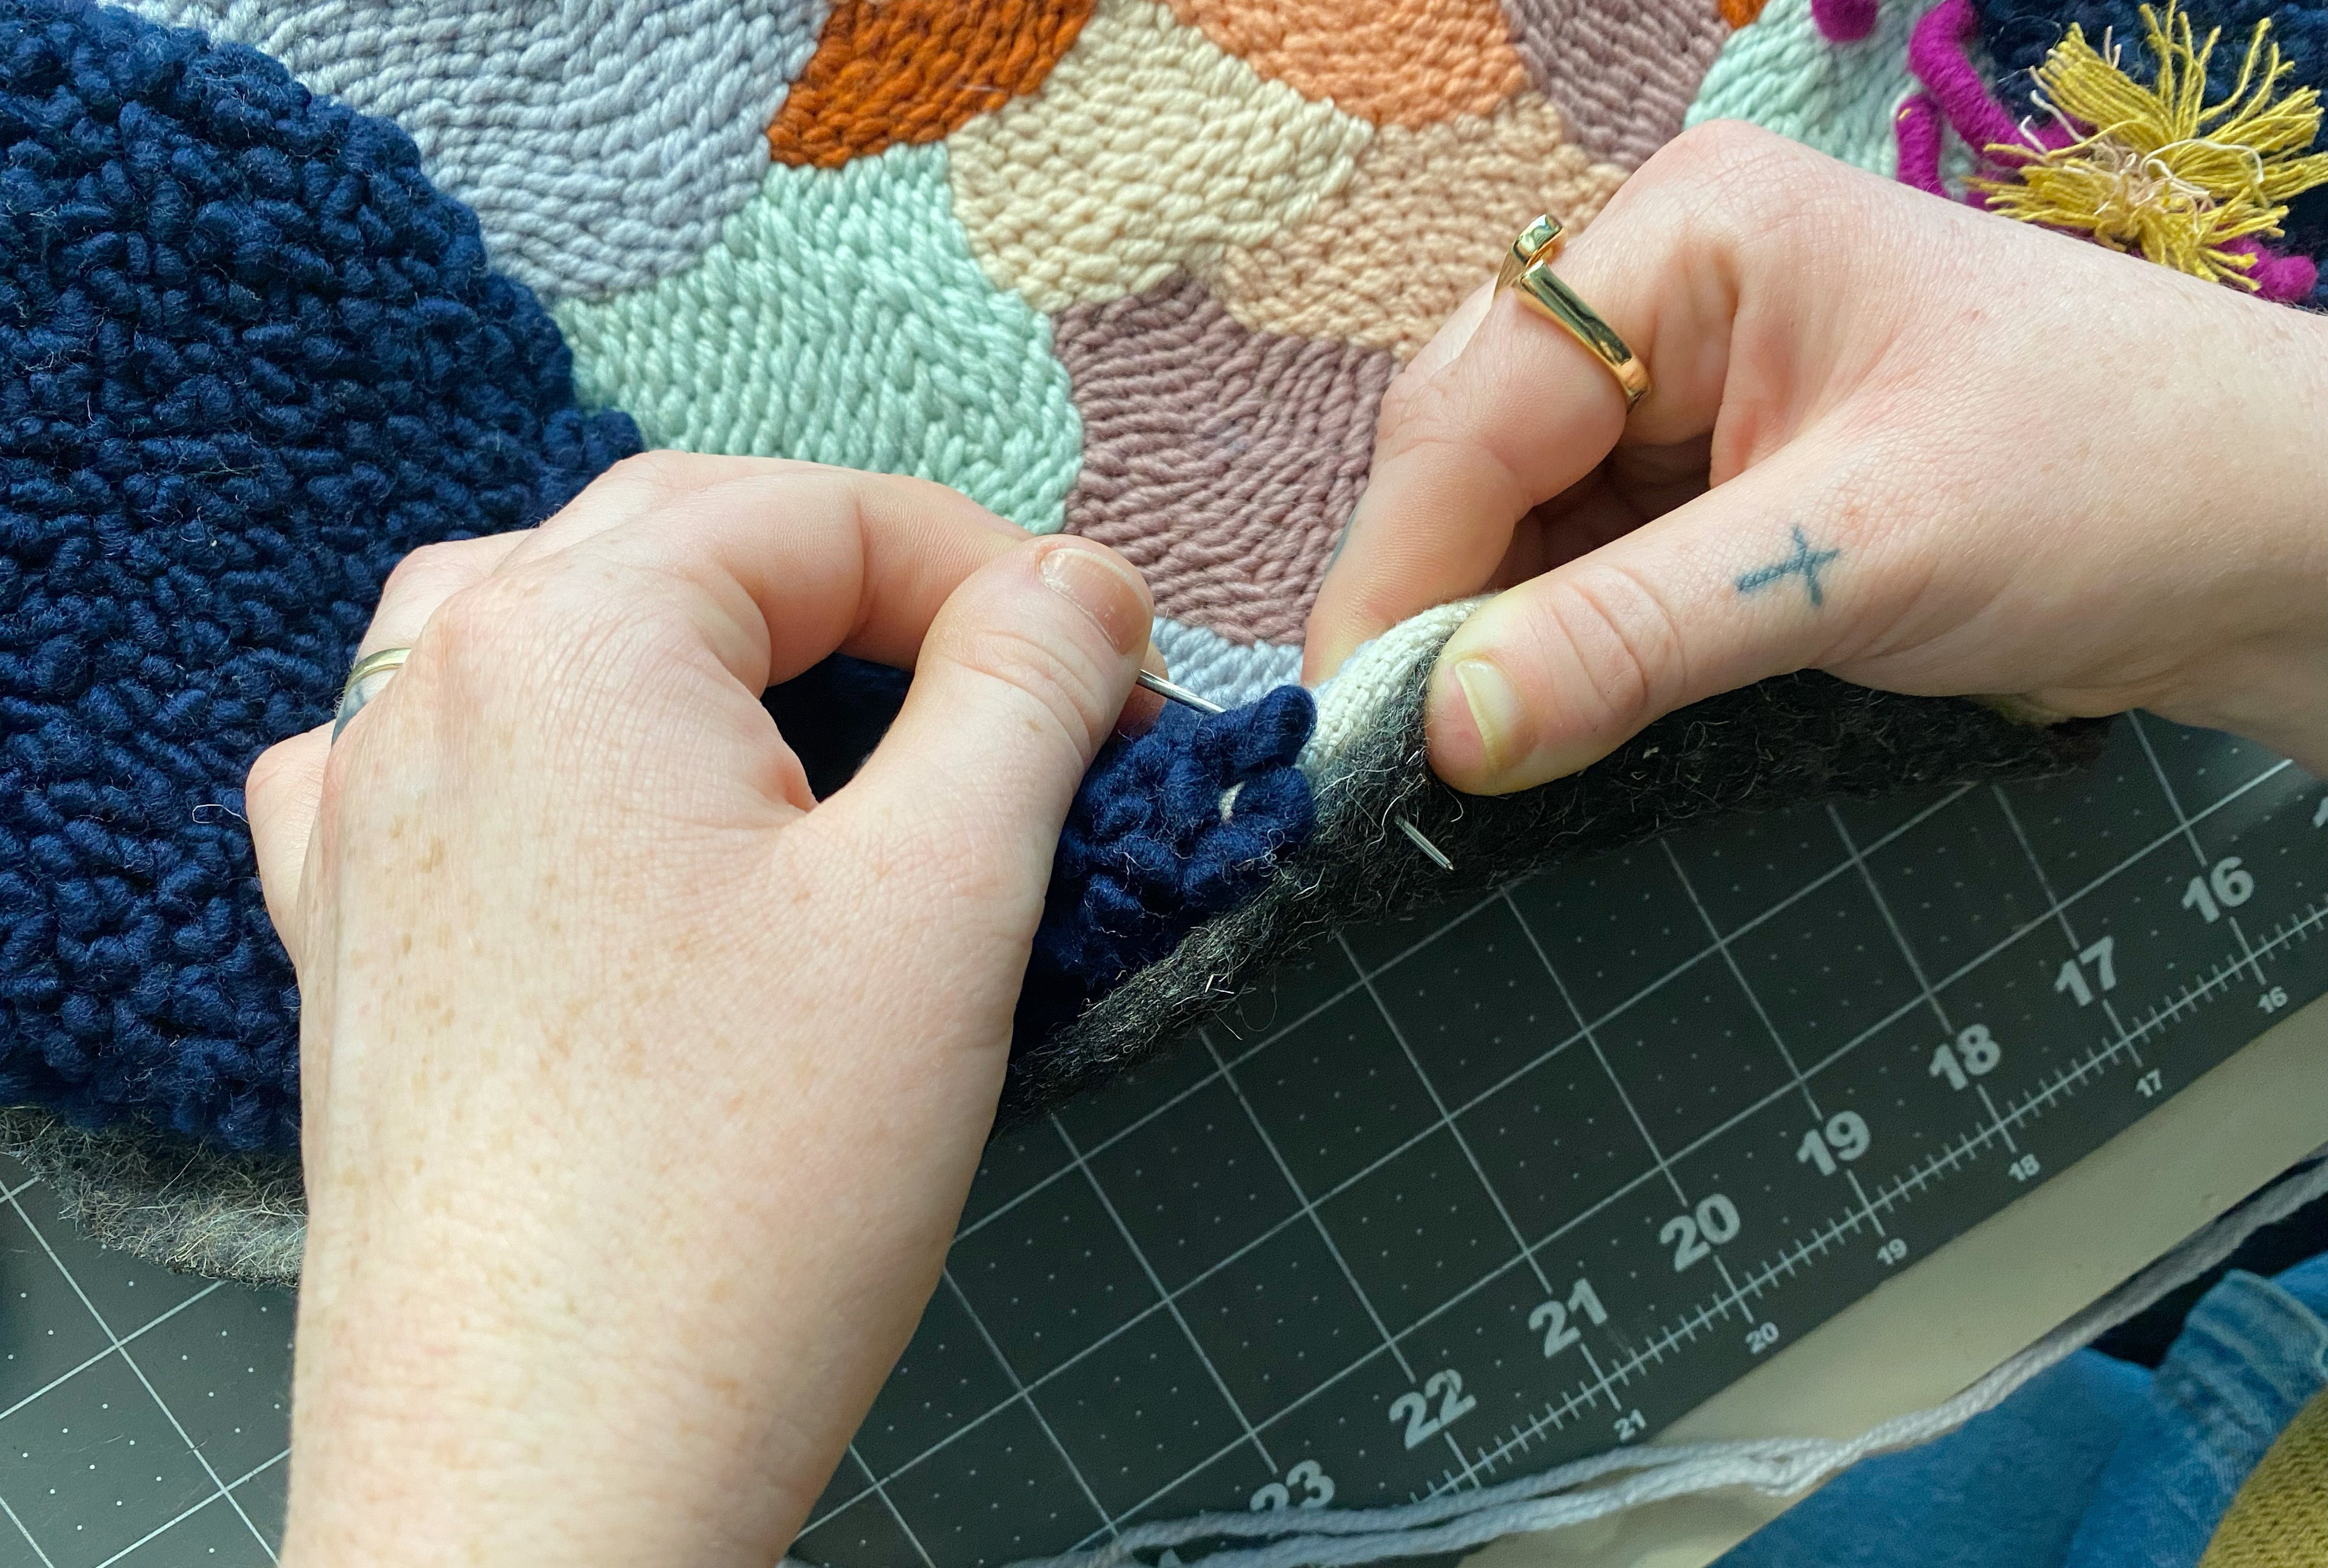 How To Back Punch Needle Projects with Industrial Felt Featuring Katie Berman Tutorial Backed Projects